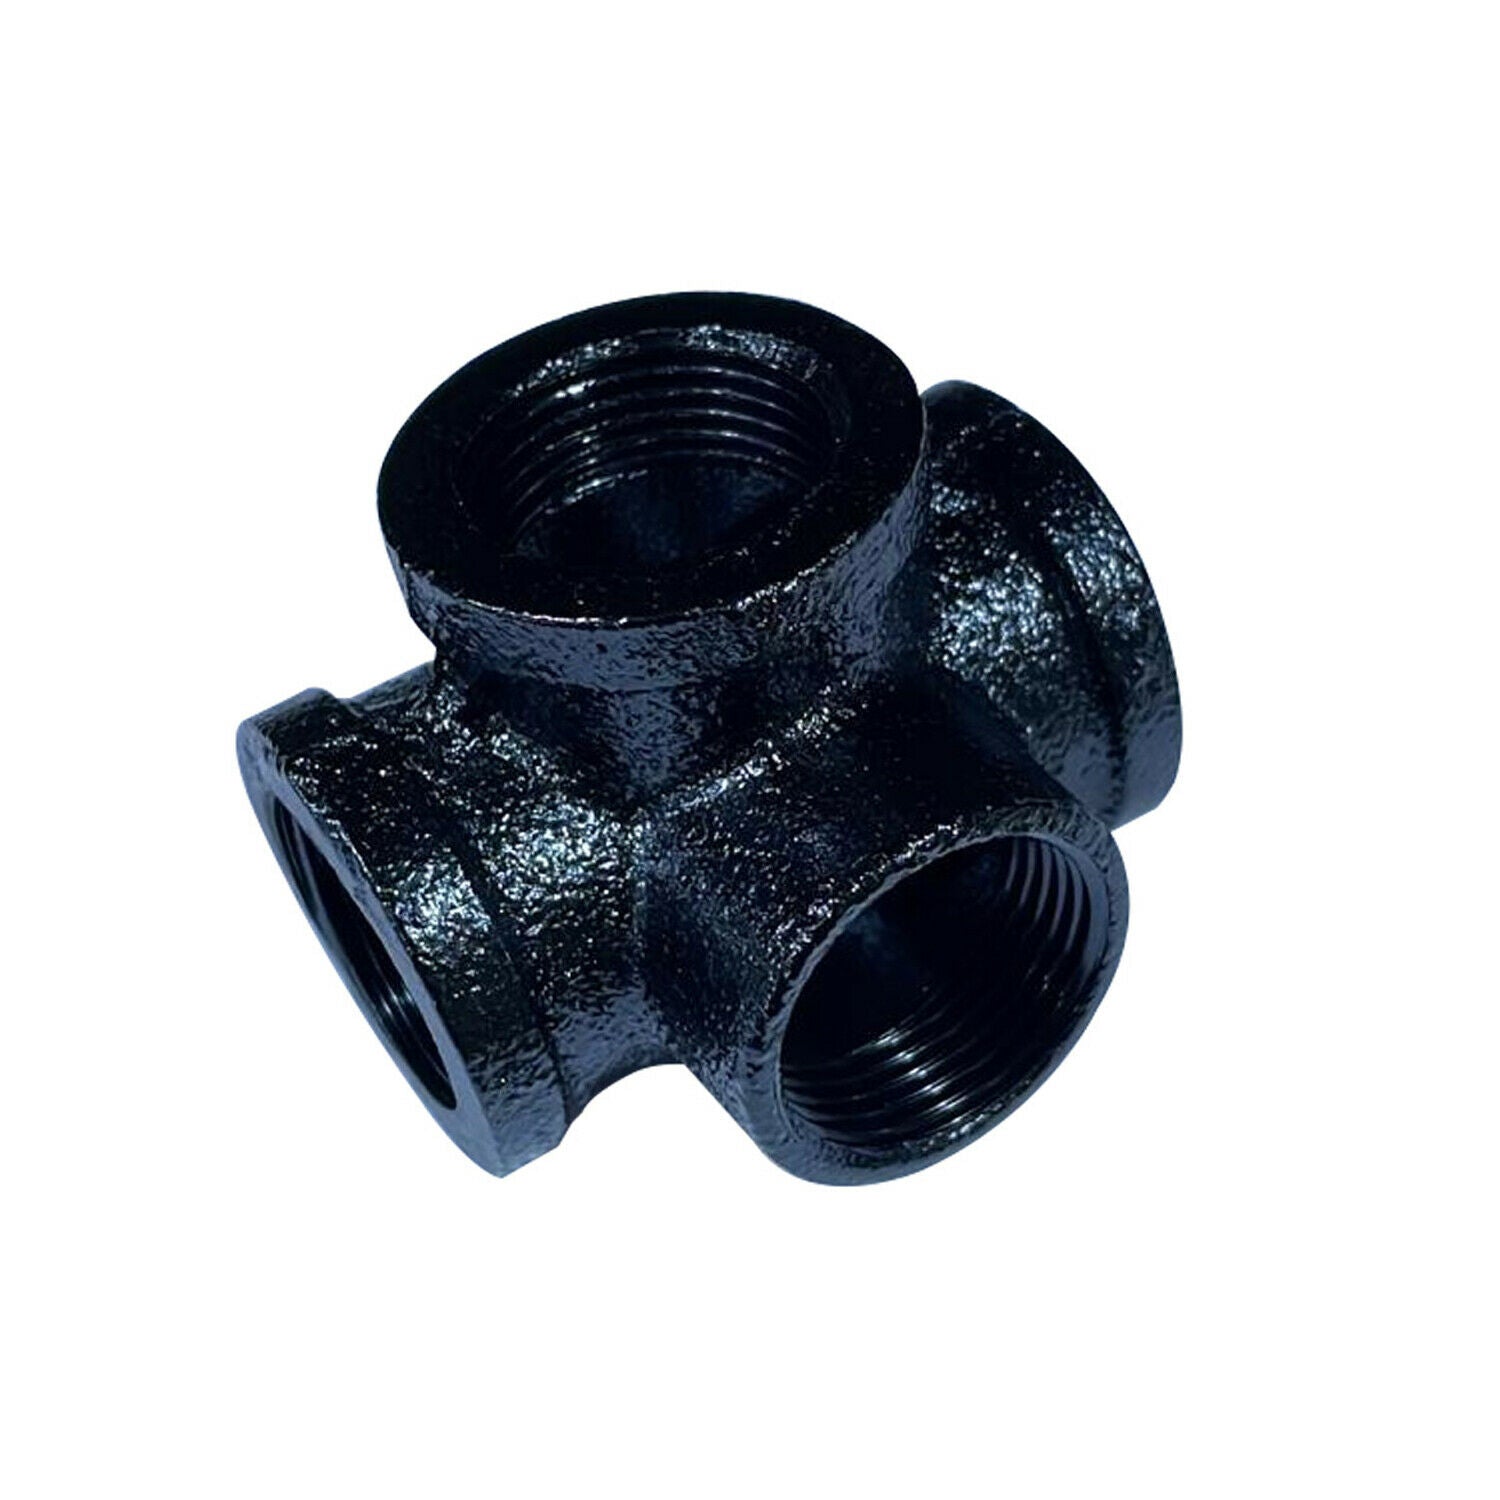 3/4 BSP MALLEABLE iron pipe BLACK Painted STEAM PUNK Cast Iron pipe fitting